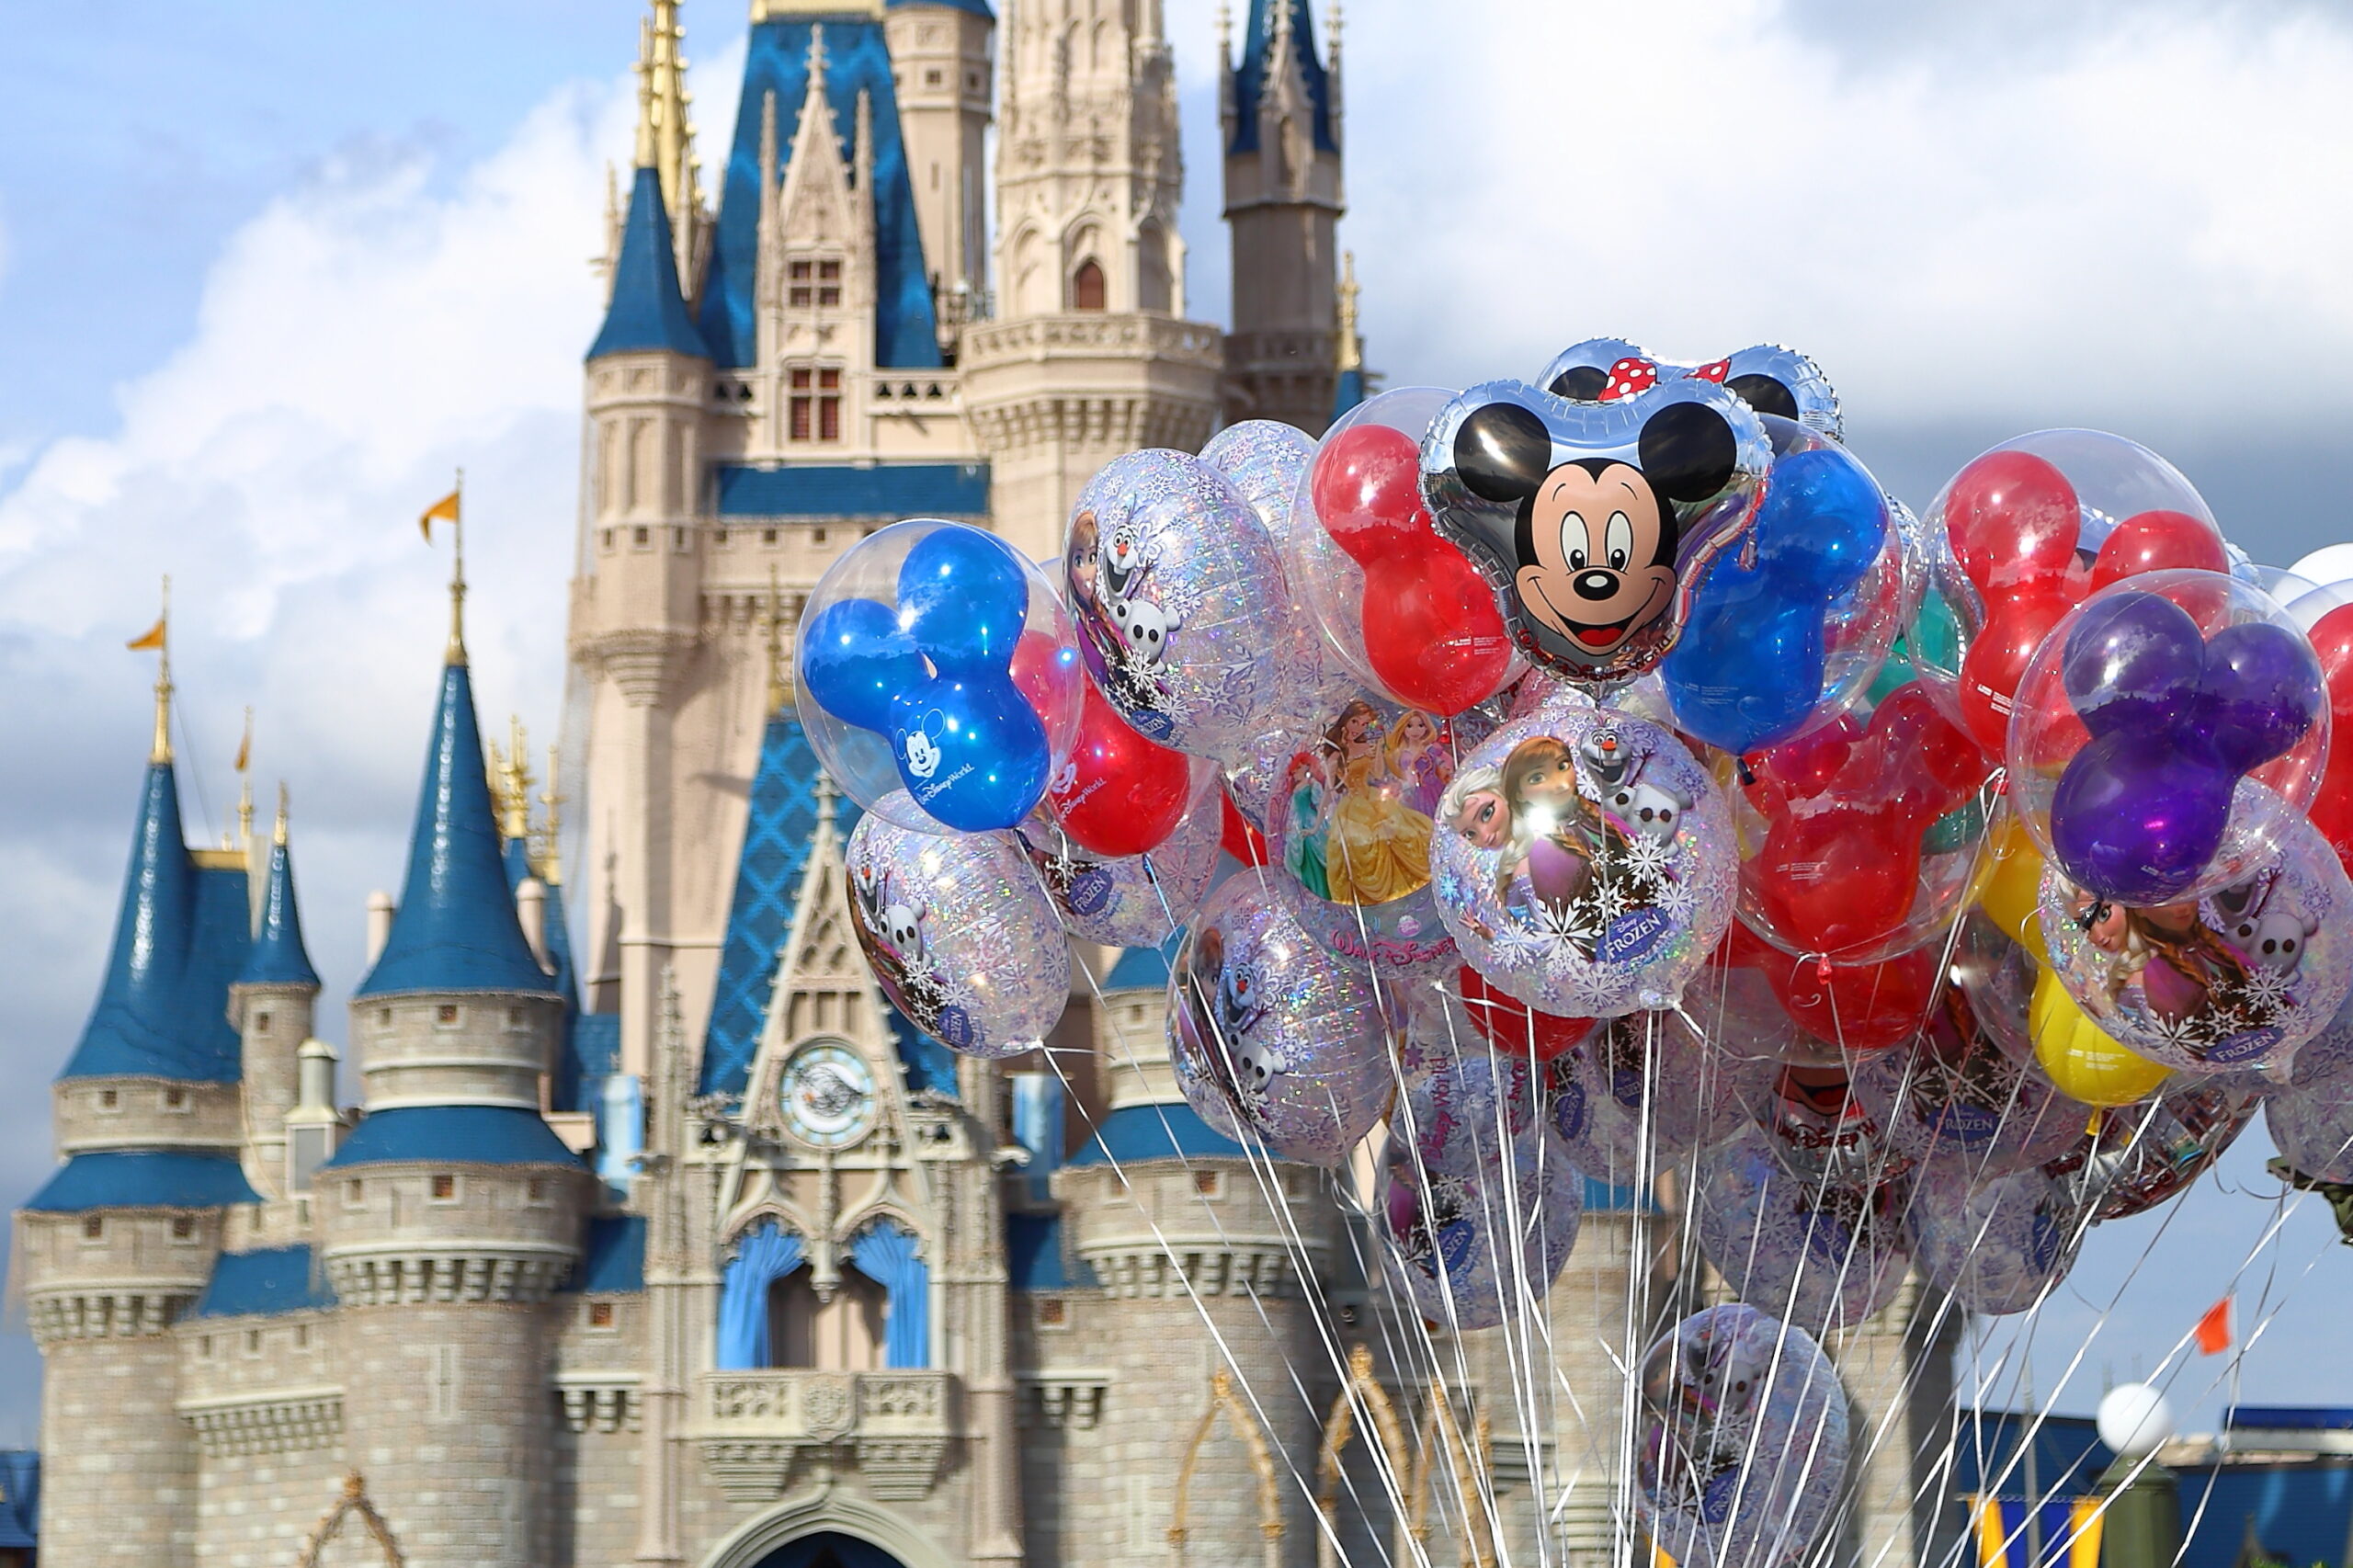 Balloons in front of Cinderella Castle - Magic Kingdom